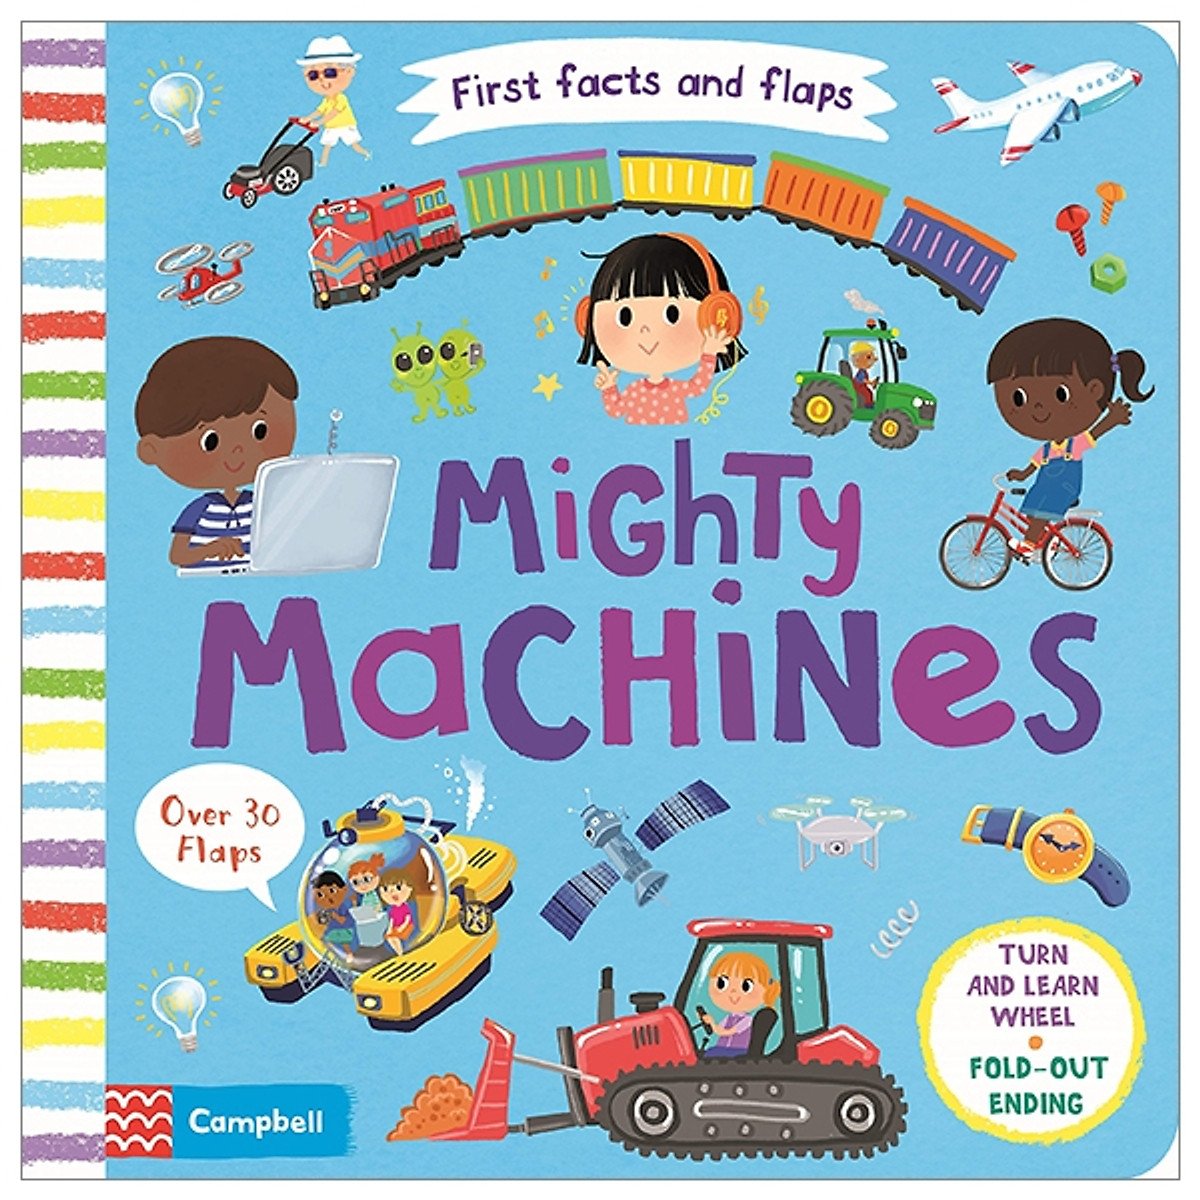 First Flaps And Facts: Mighty Machines